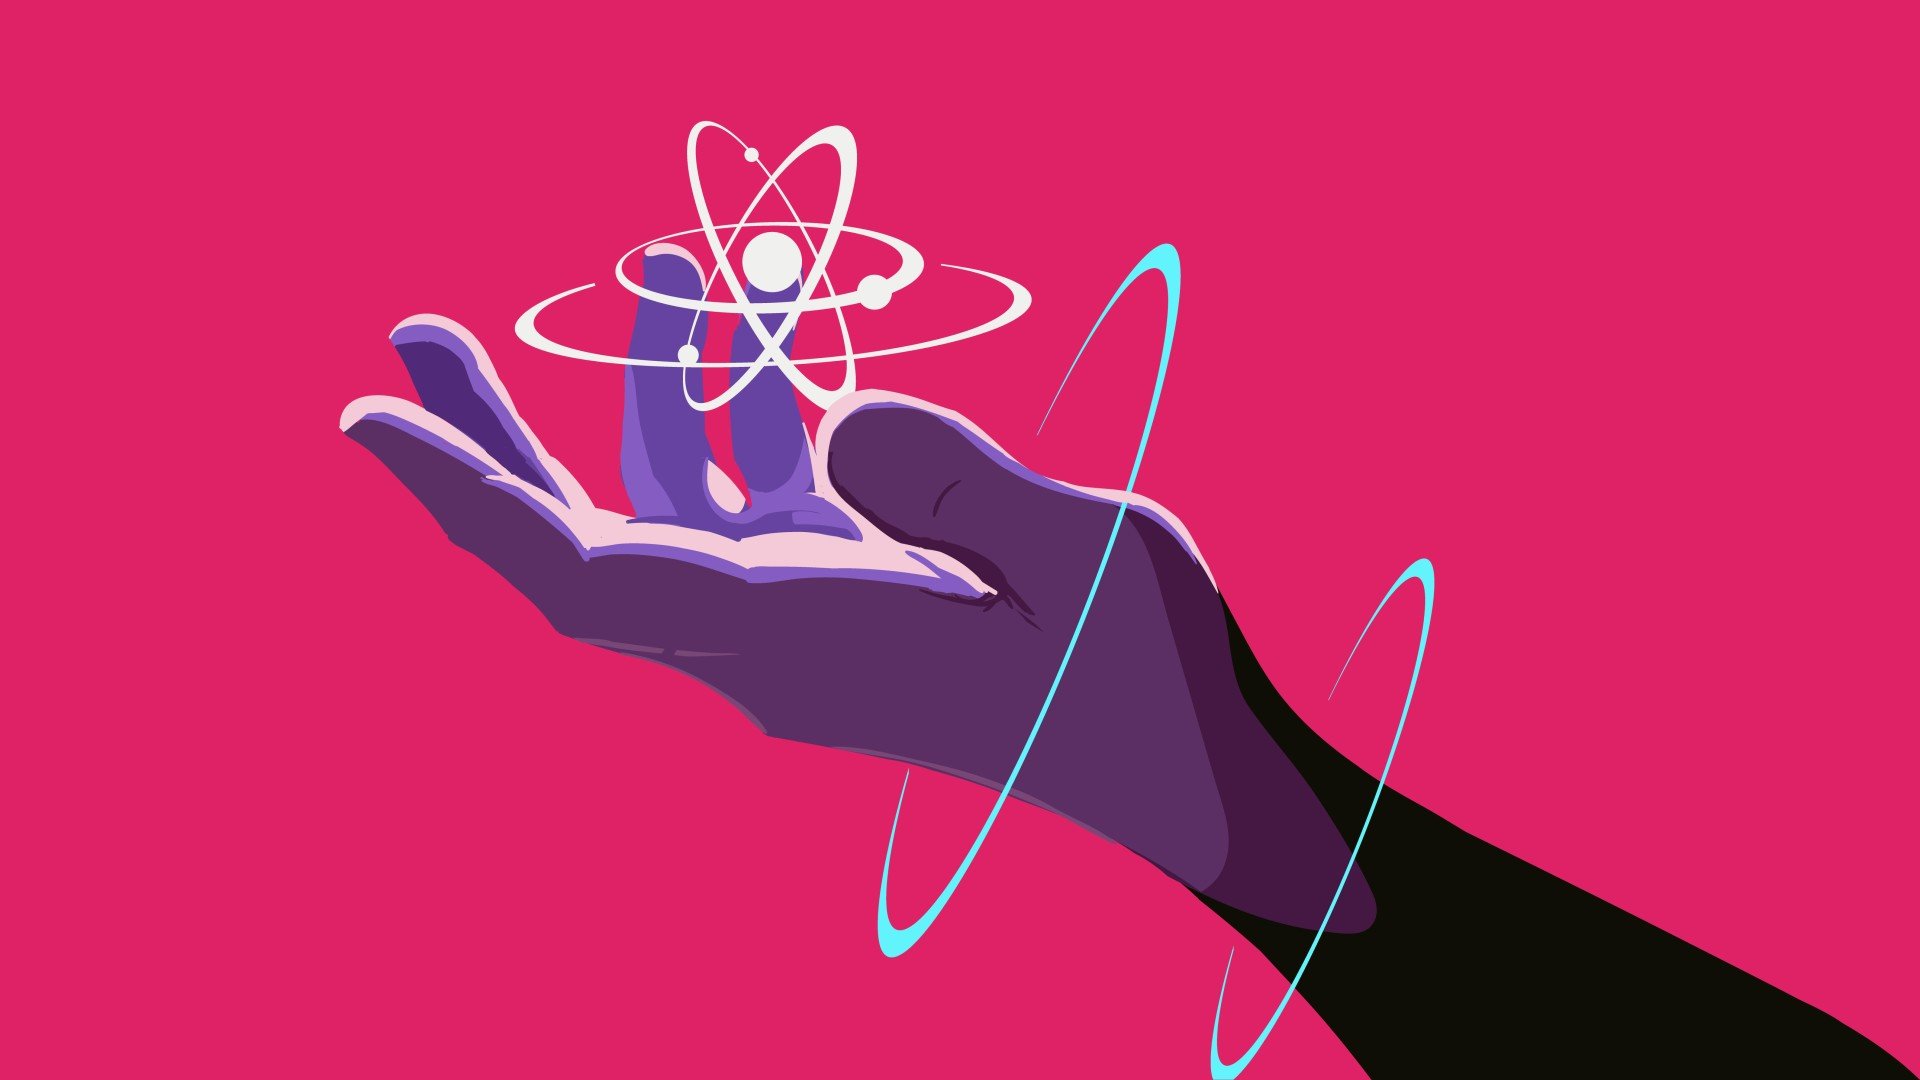 Illustration that shows a hand and an abstract atom symbol floating above it